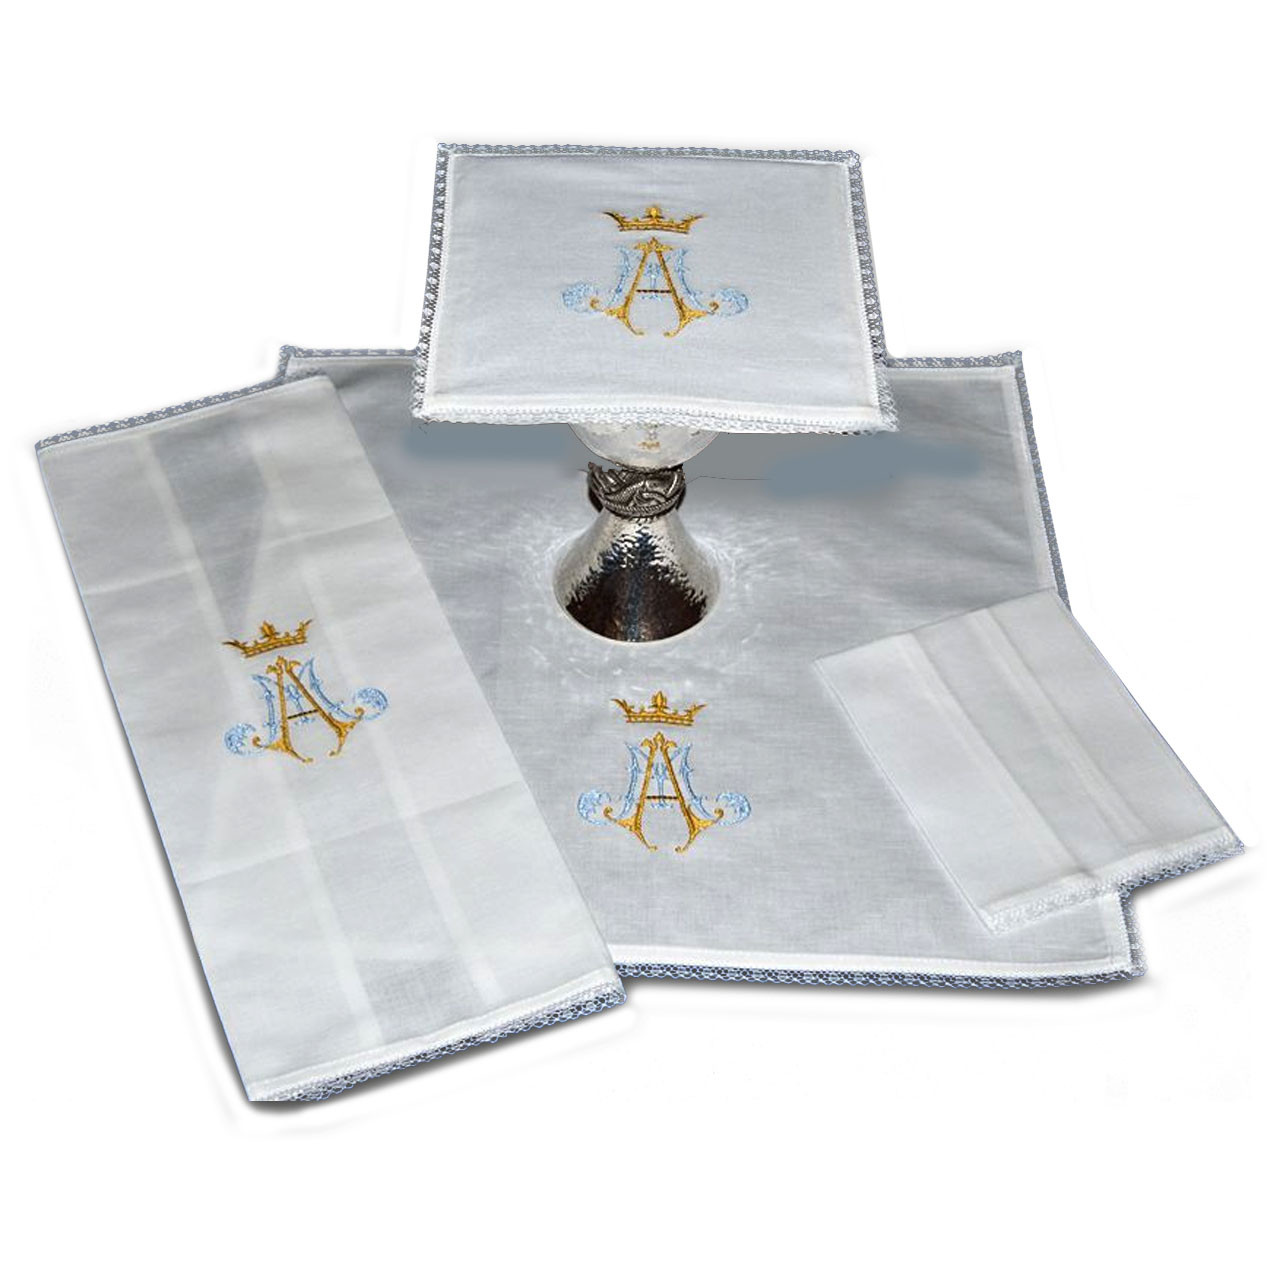 3025 Marian Mass Linen Set with Lace Edging